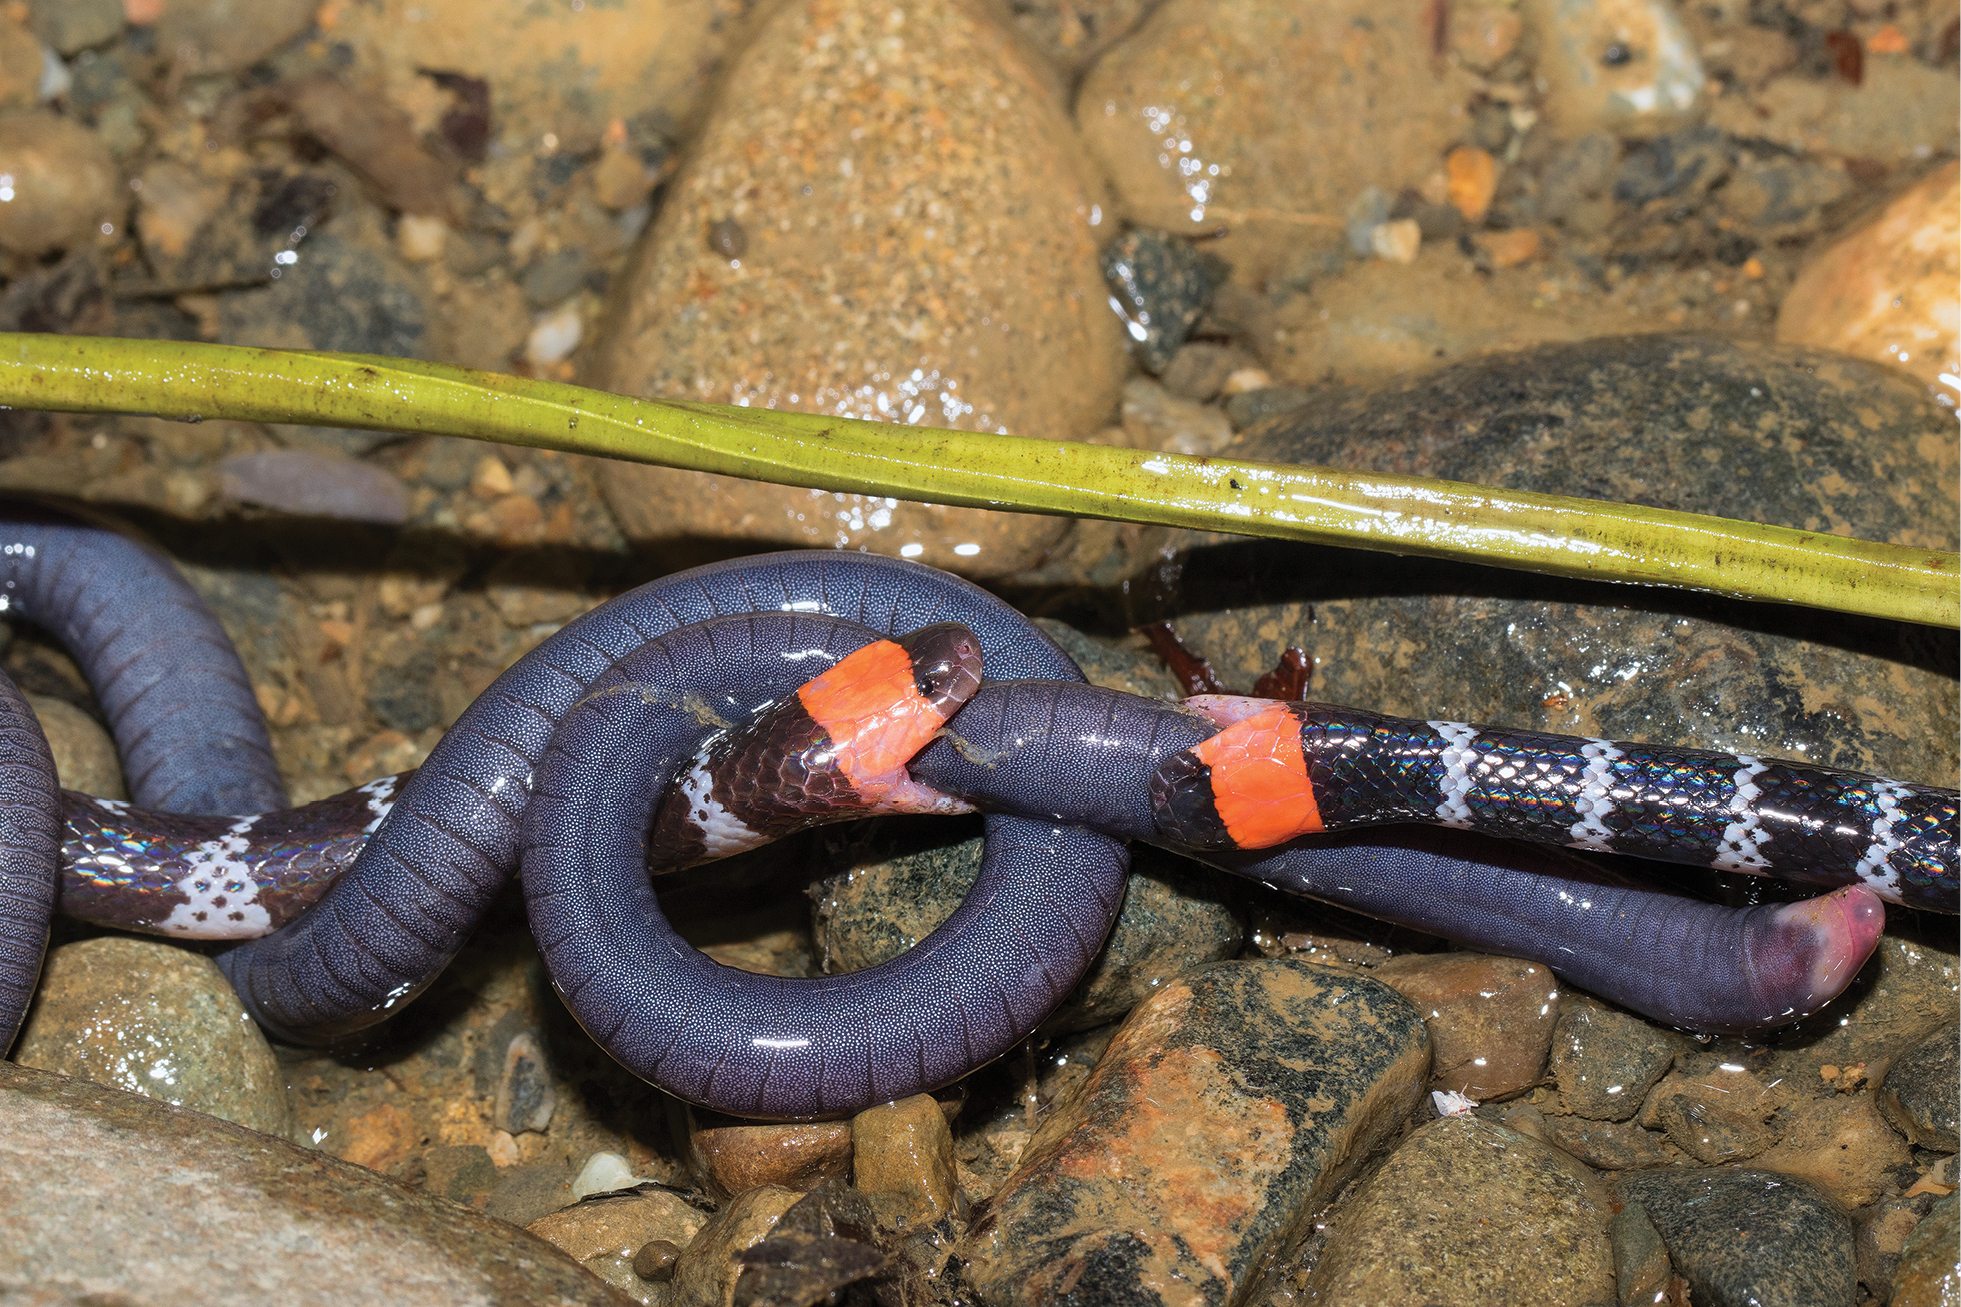 Two coral snakes in a tug-of-war over a worm lizard called a caecilian